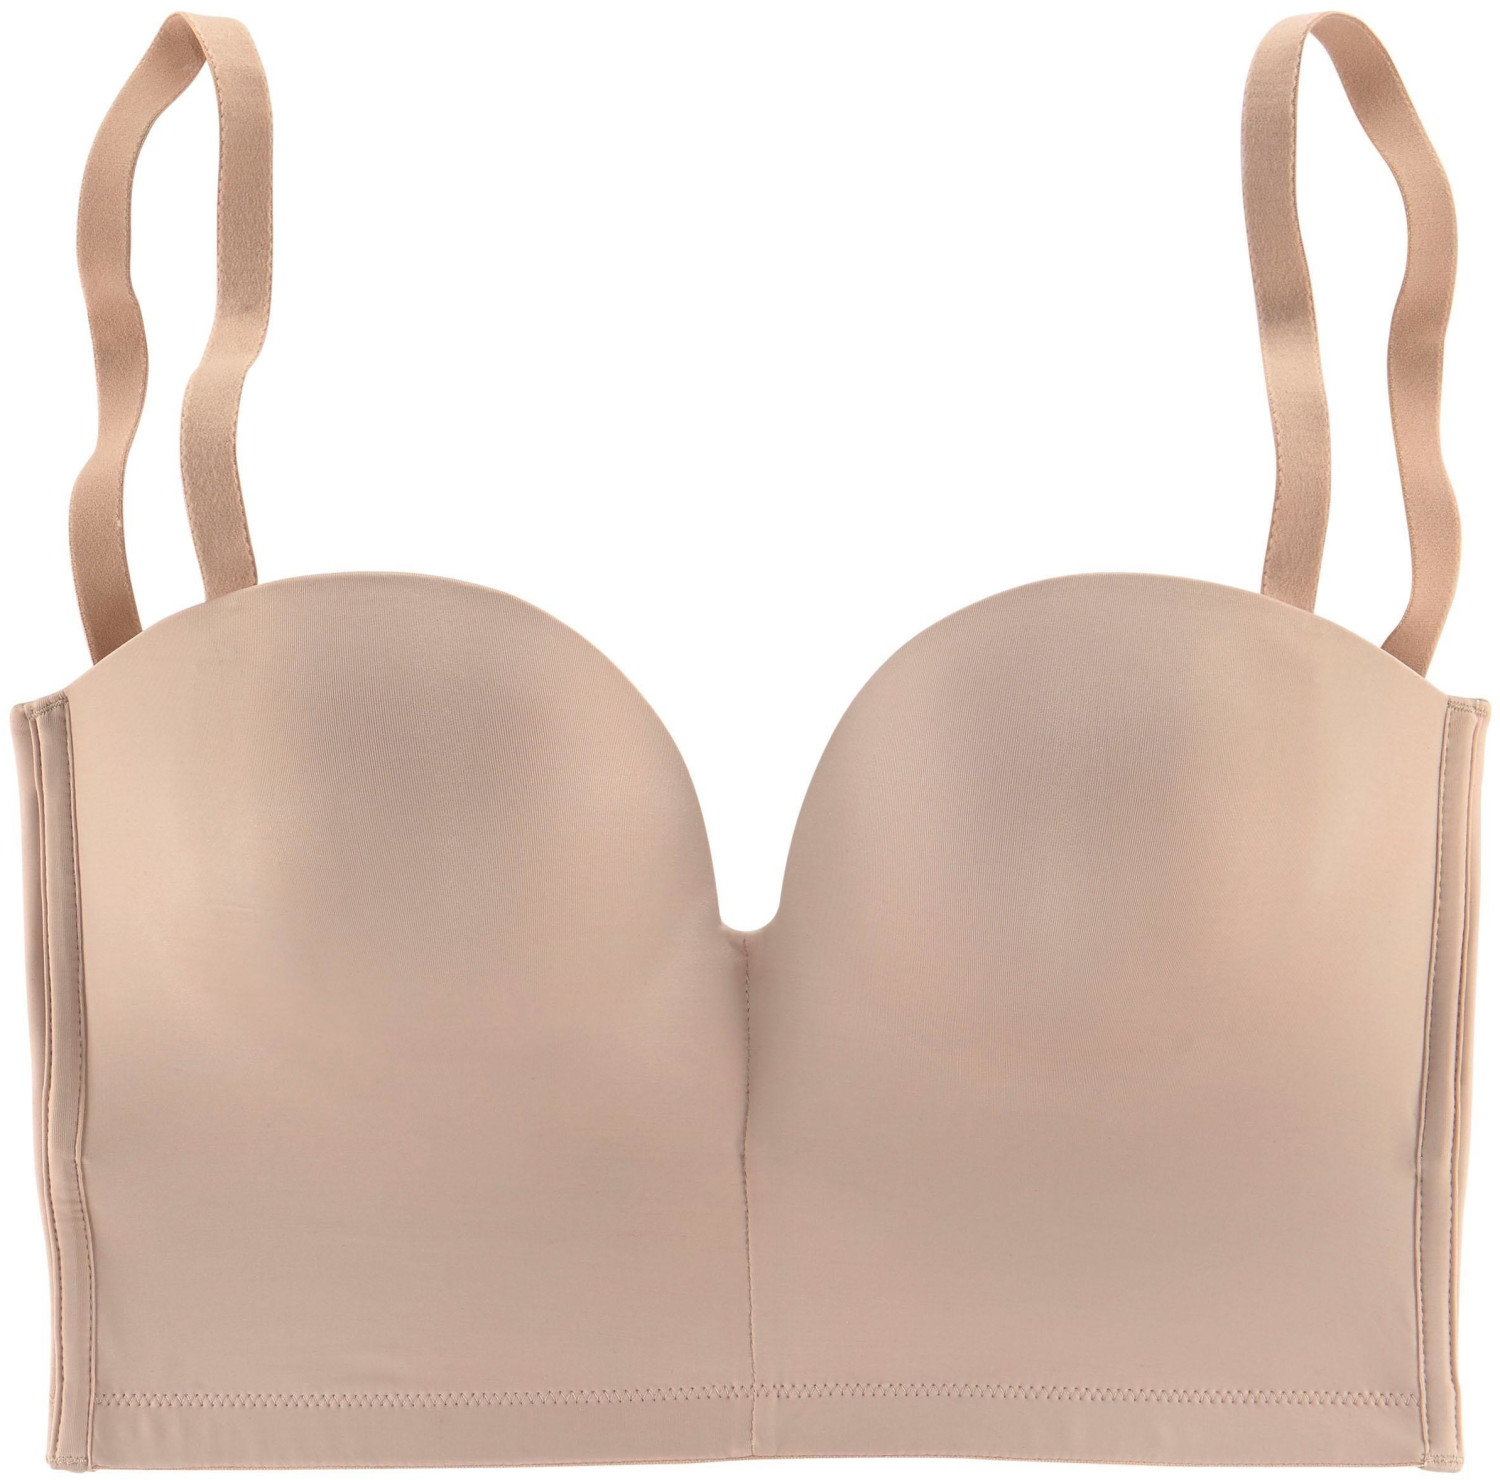 Women's Push Up Bra Lace Ultimate Boost Backless Strapless Bra